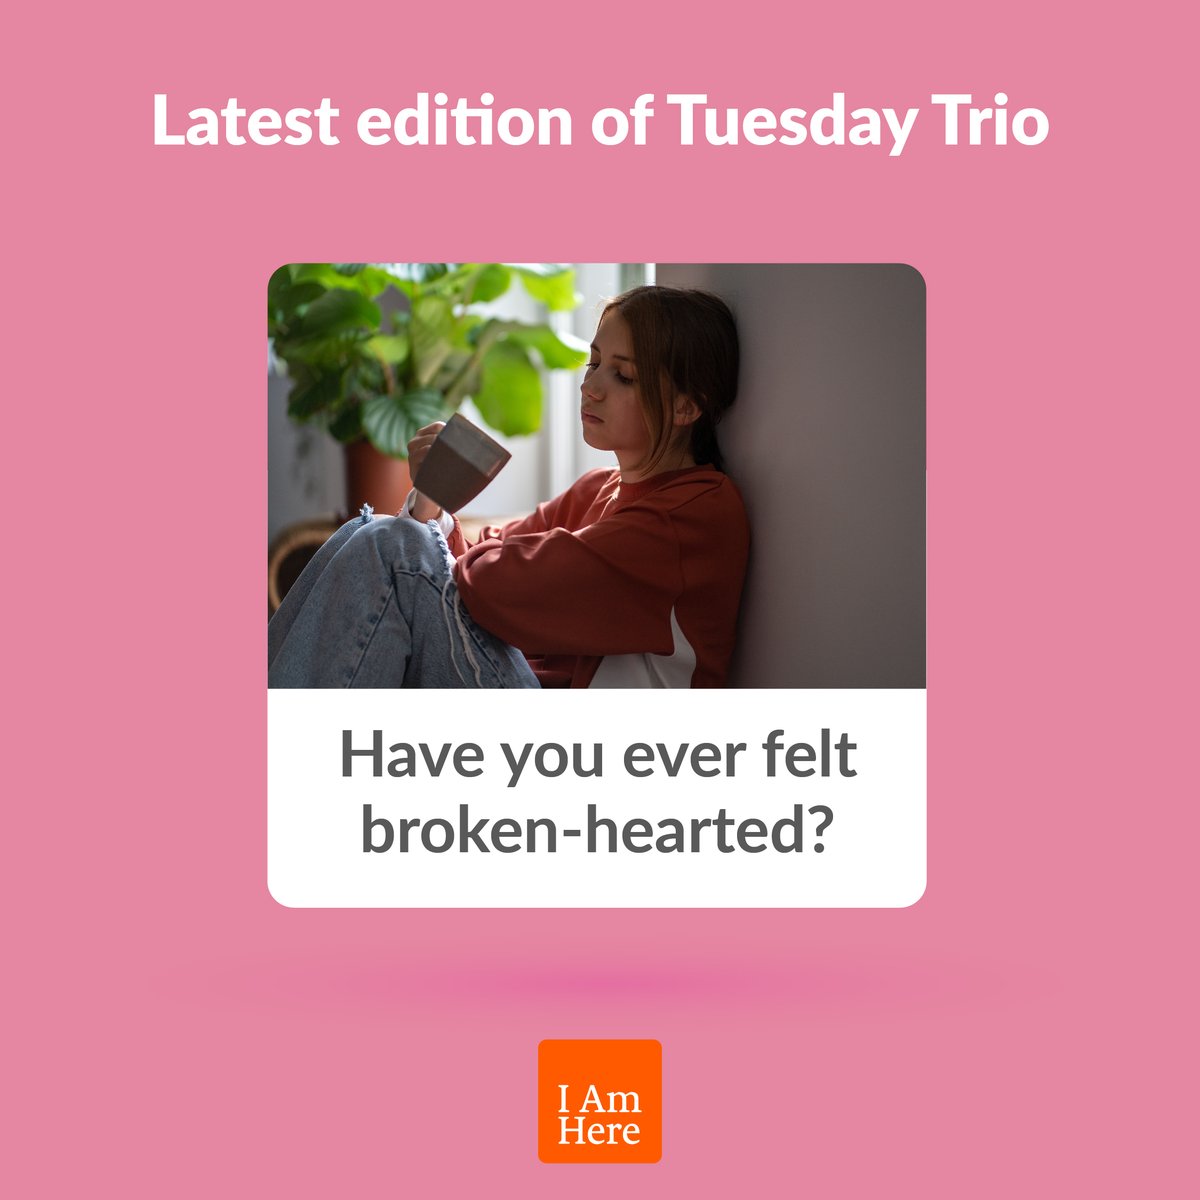 Where do broken hearts go? Do they find a way home? This week on our Tuesday Trio, we explore the physically and emotionally challenging experience of being left broken-hearted and how we get around that.
Link
#SelfCare #SelfManagement #PowerOfHelp #AskTheQuestion #MentalHealth